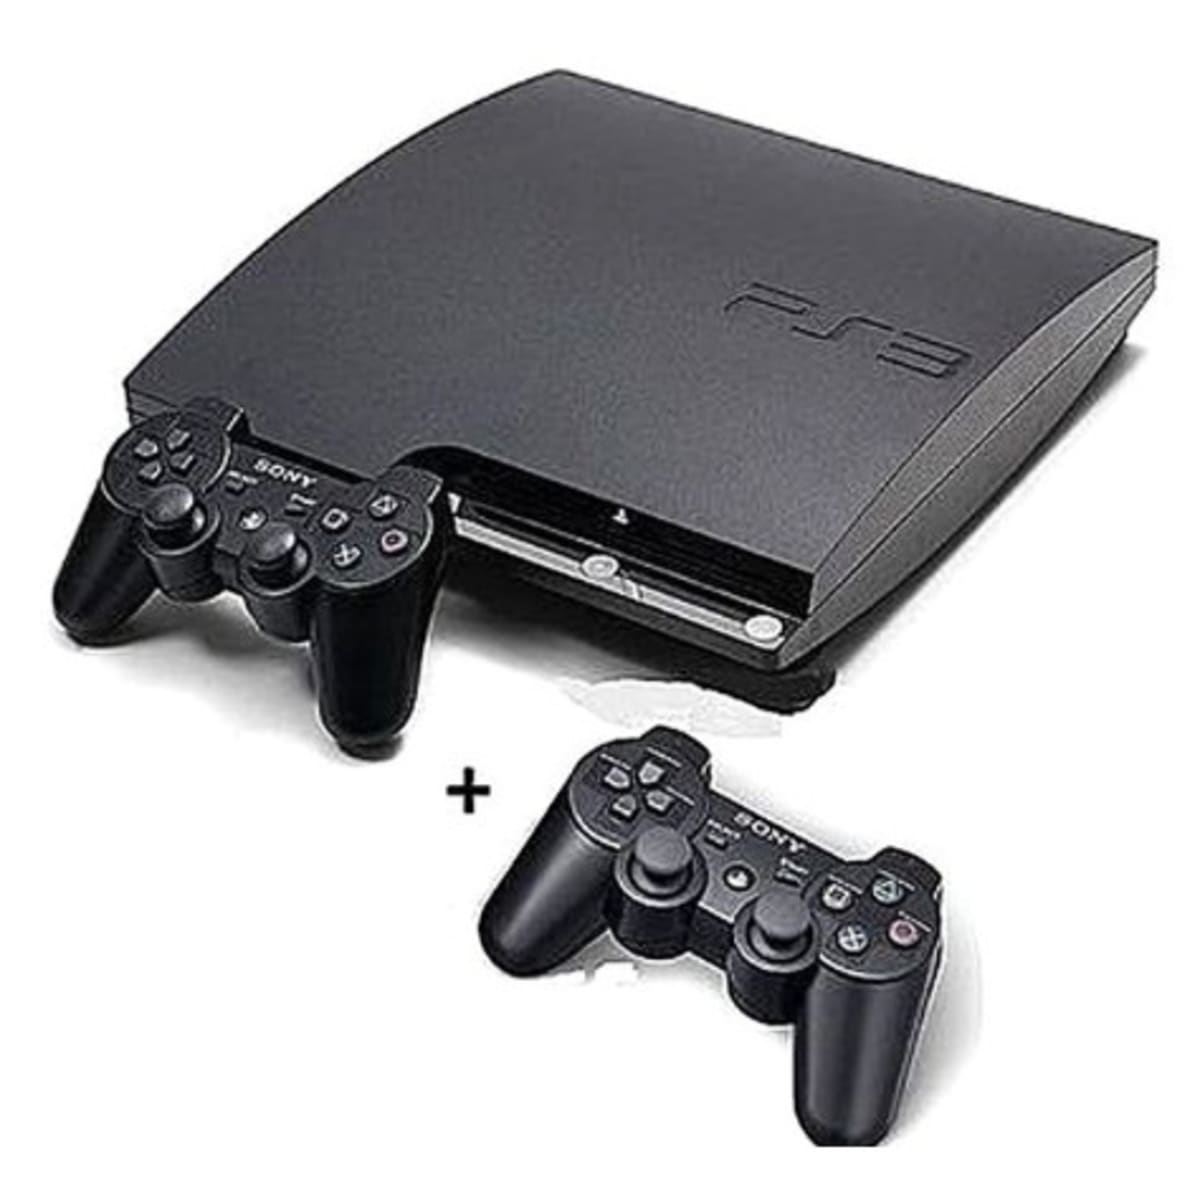 Sony Ps3 Console Slim - 320gb With 20 Bonus Games And 2 Pads